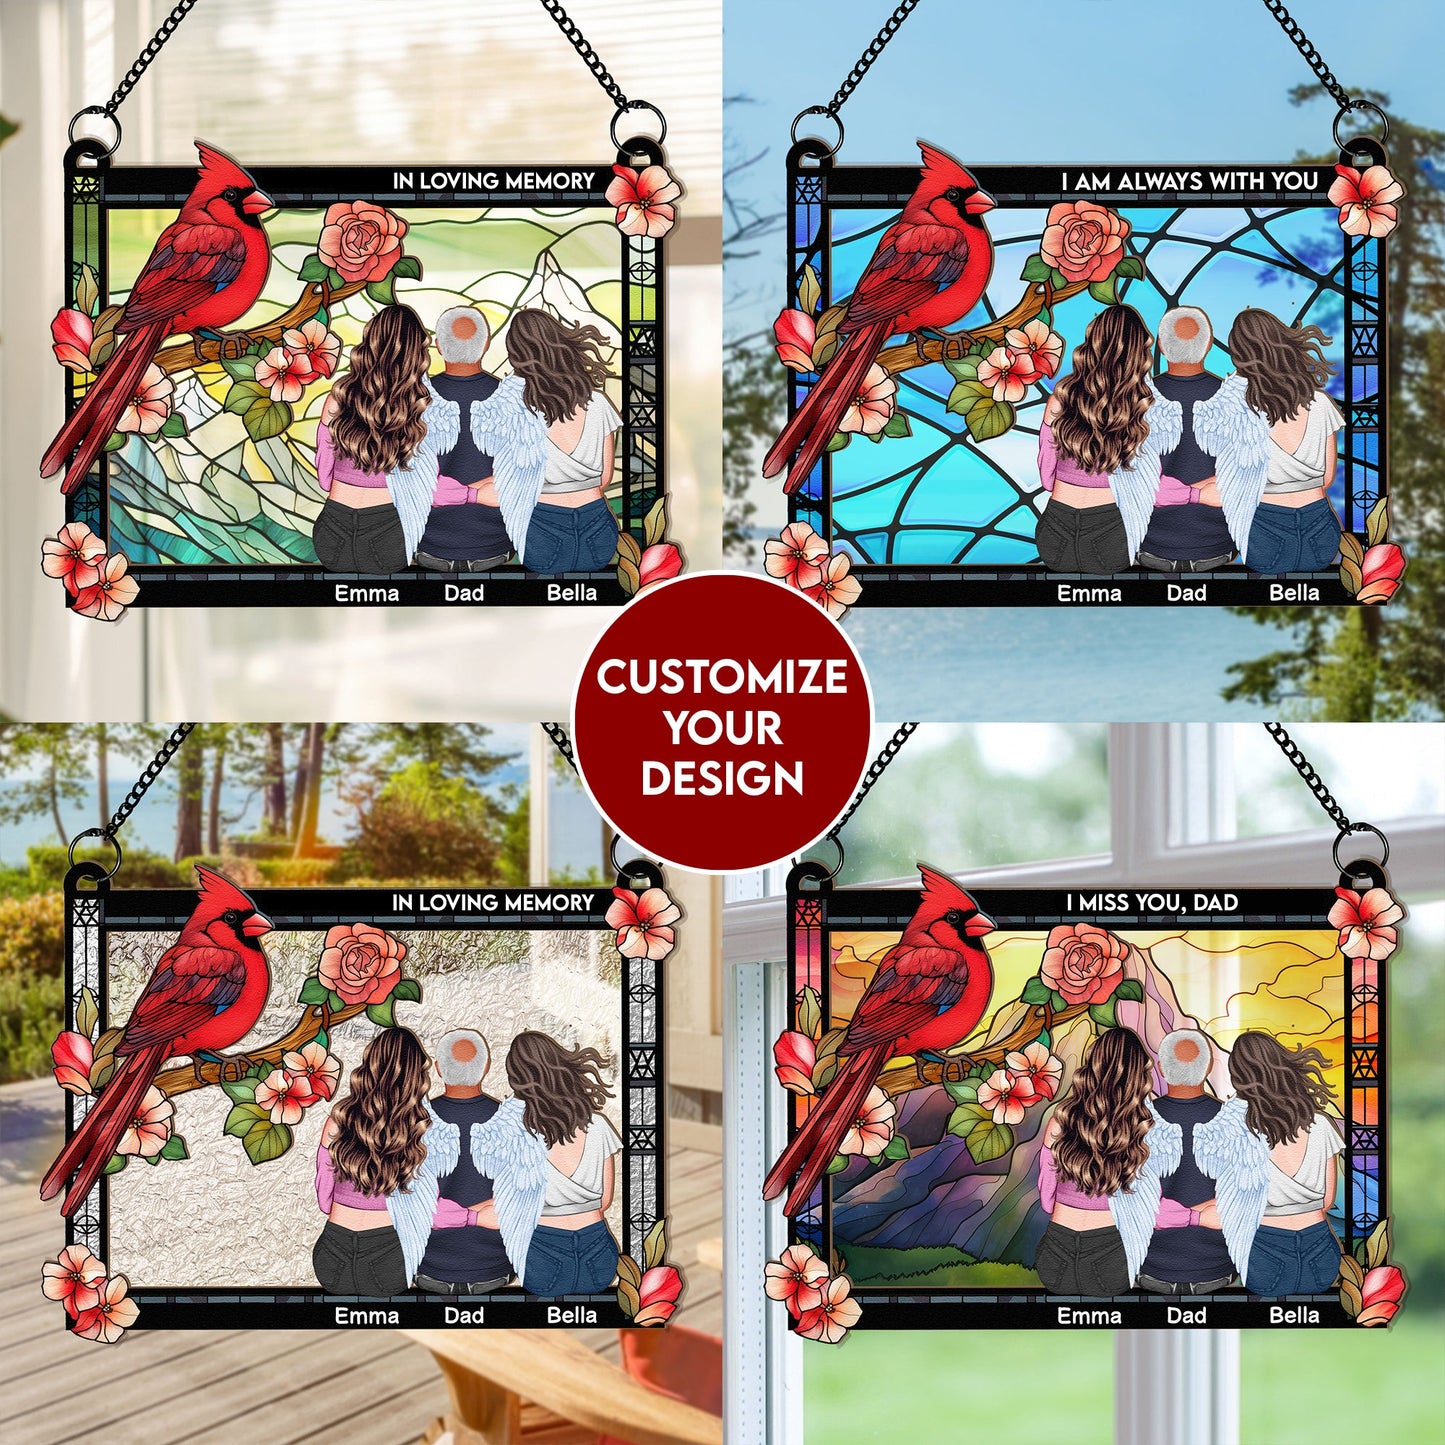 Cardinal Always With You - Personalized Window Hanging Suncatcher Ornament